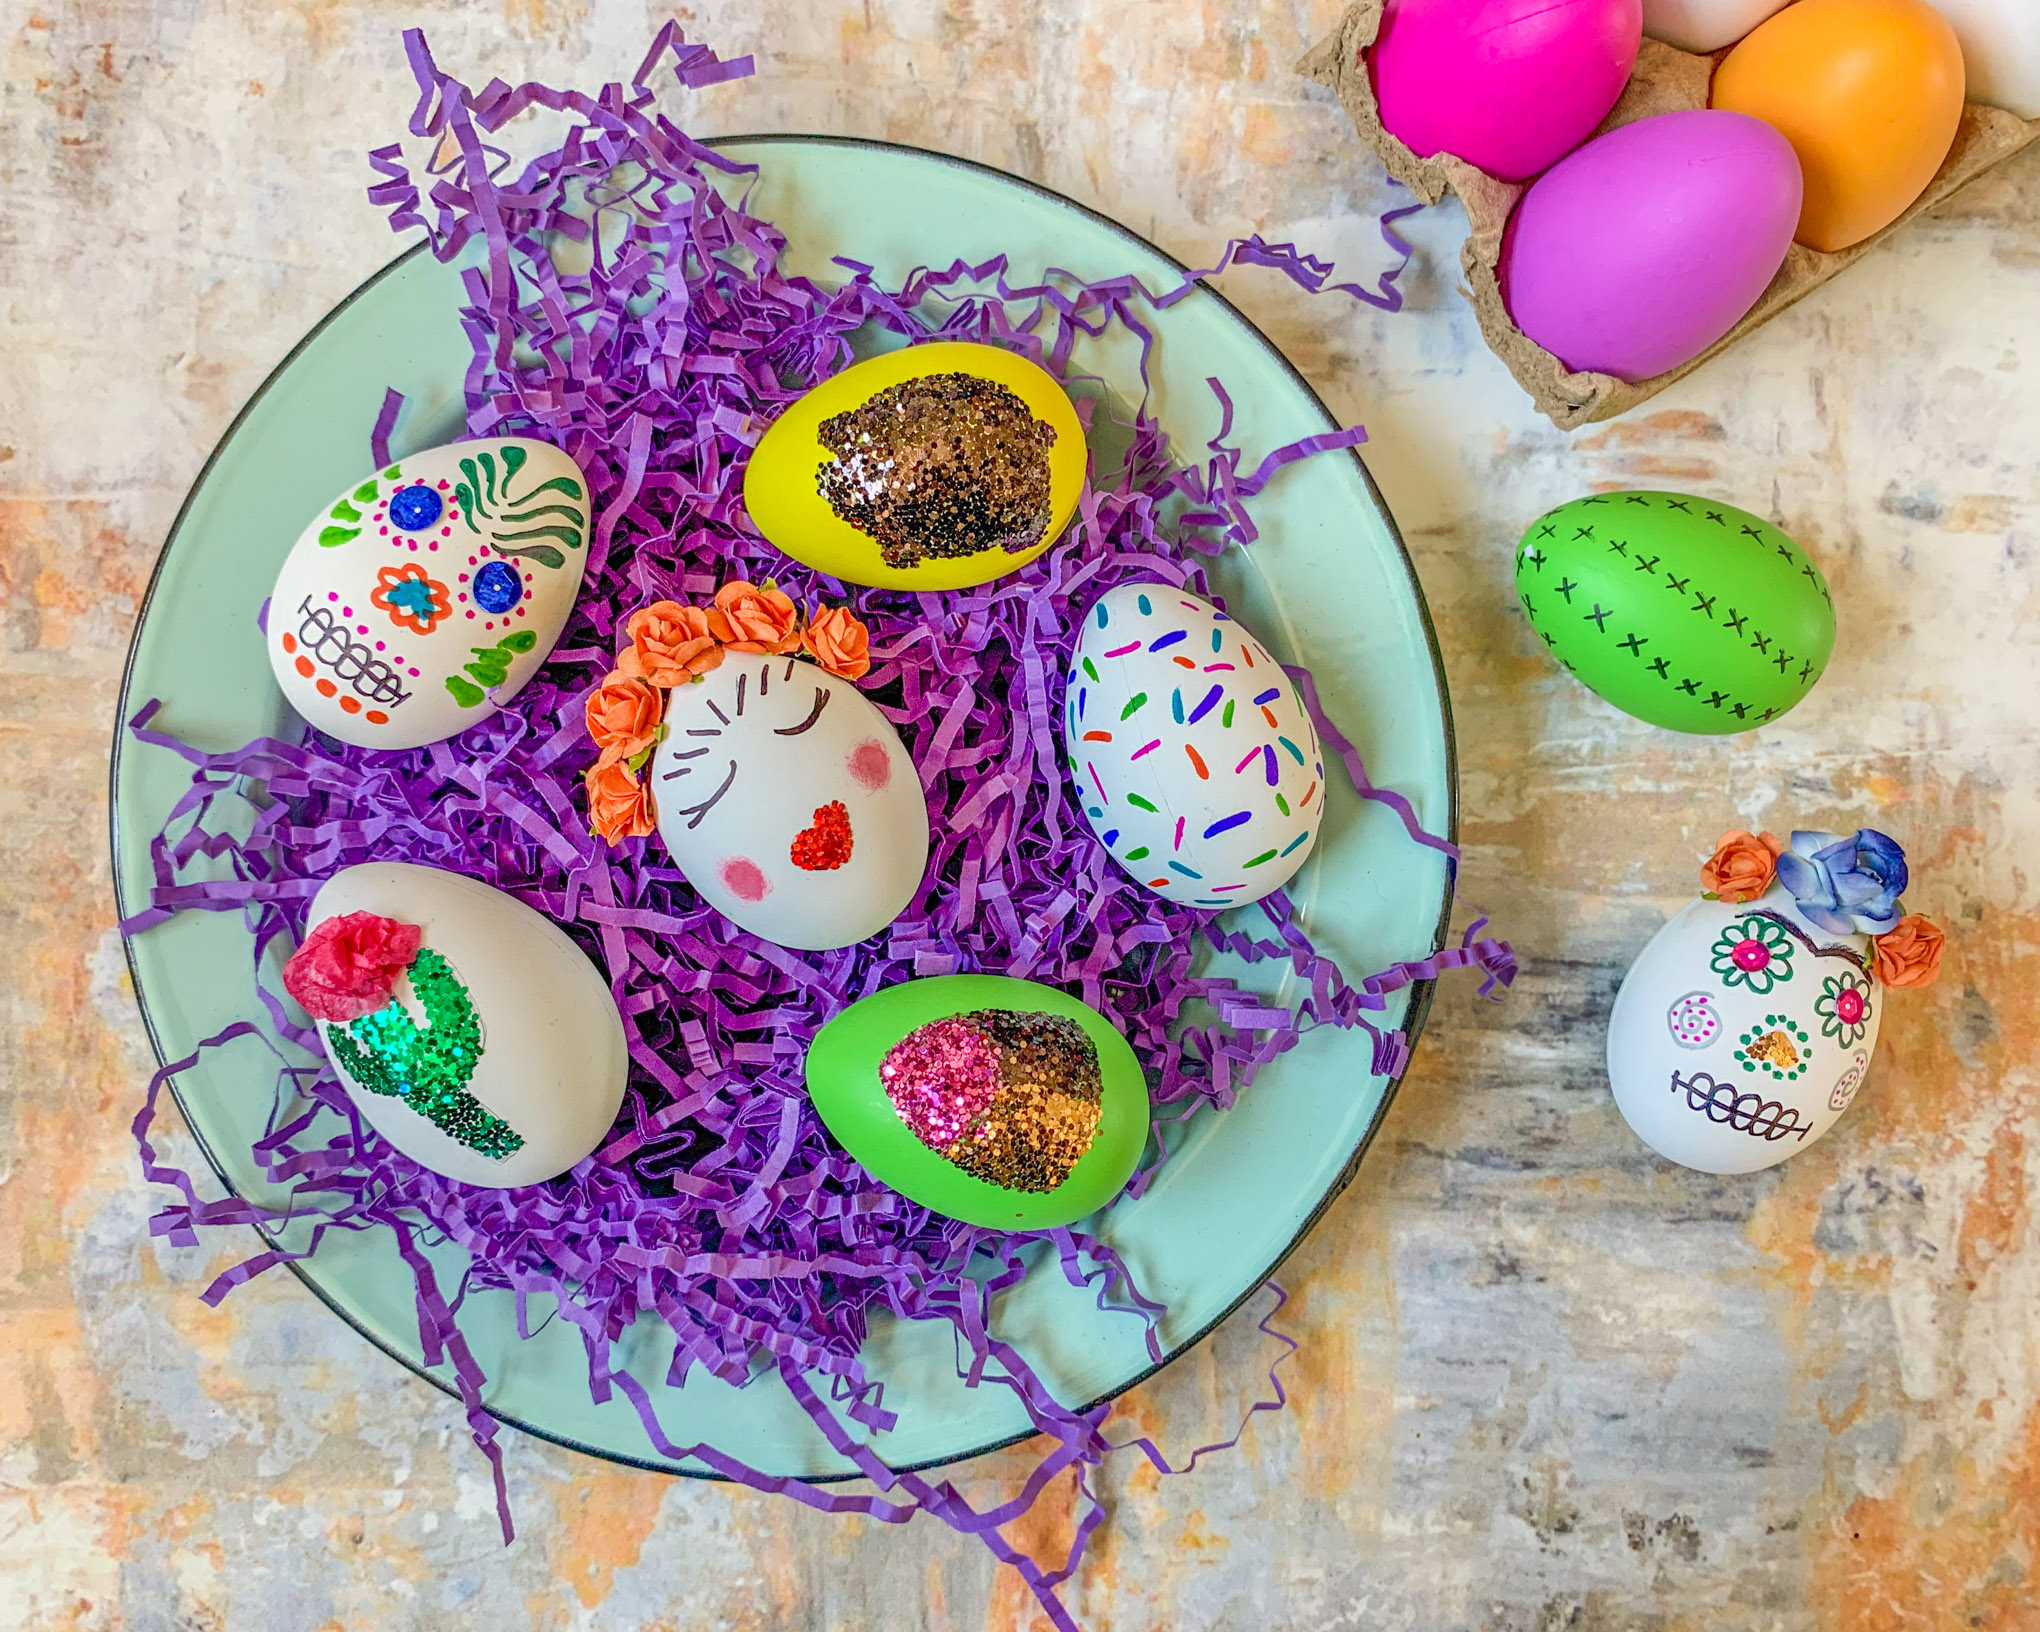 Fiesta and Fun: Bedazzling Your Easter Huevos